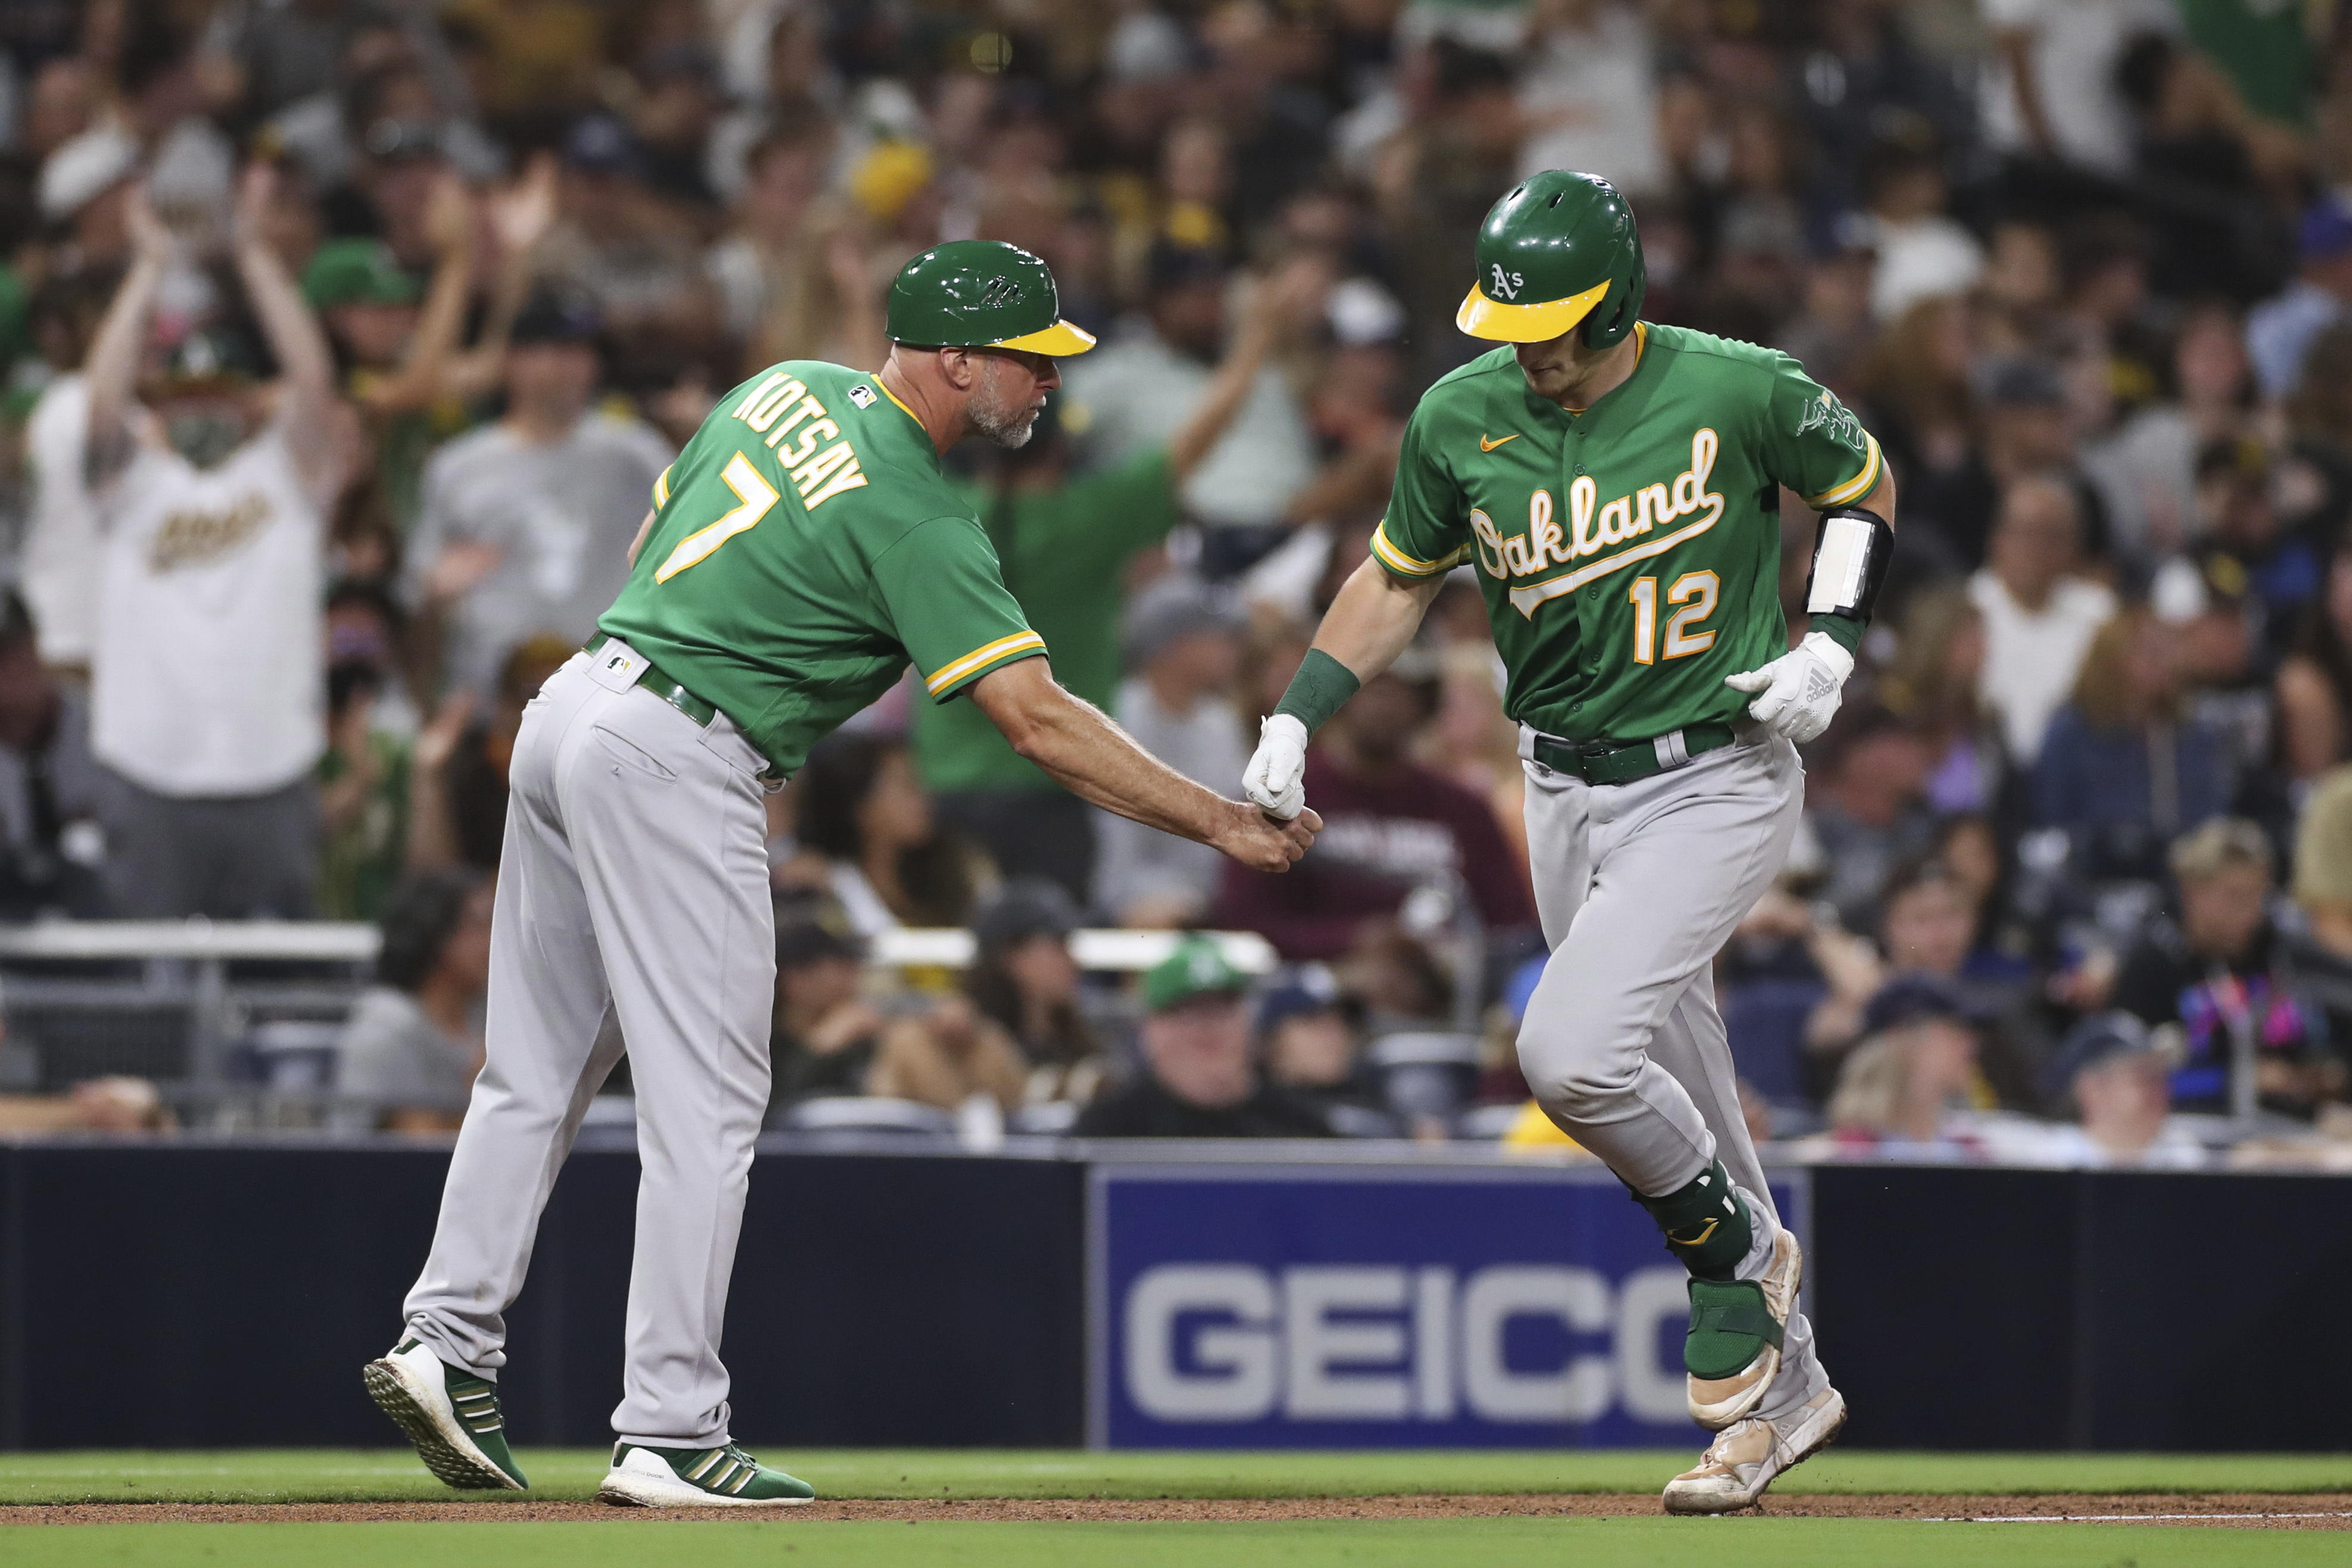 Oakland A's news: What teams are eyeing Frankie Montas? - Athletics Nation